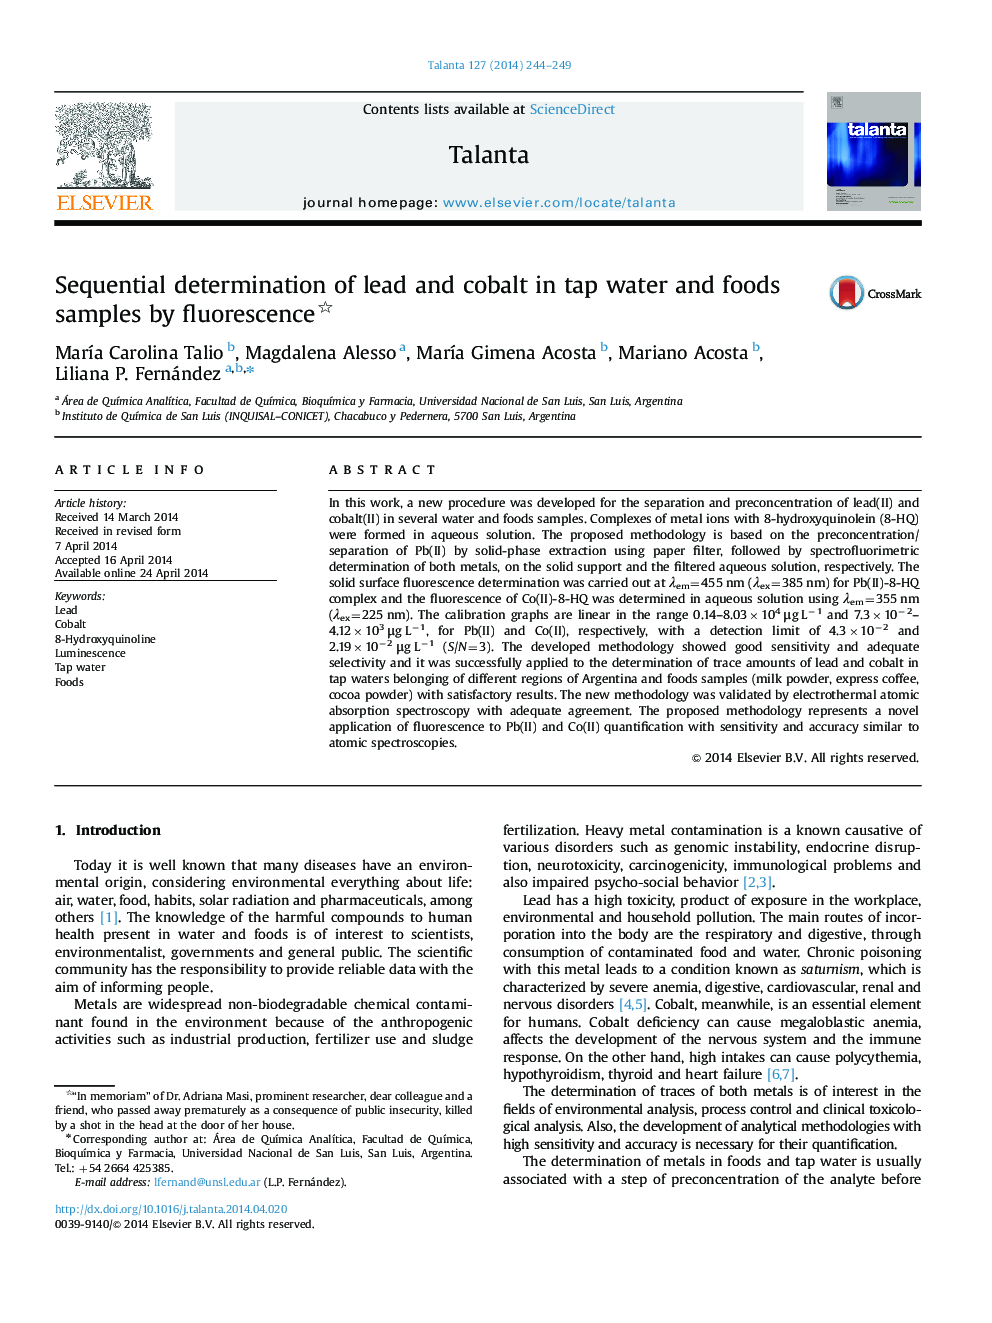 Sequential determination of lead and cobalt in tap water and foods samples by fluorescence